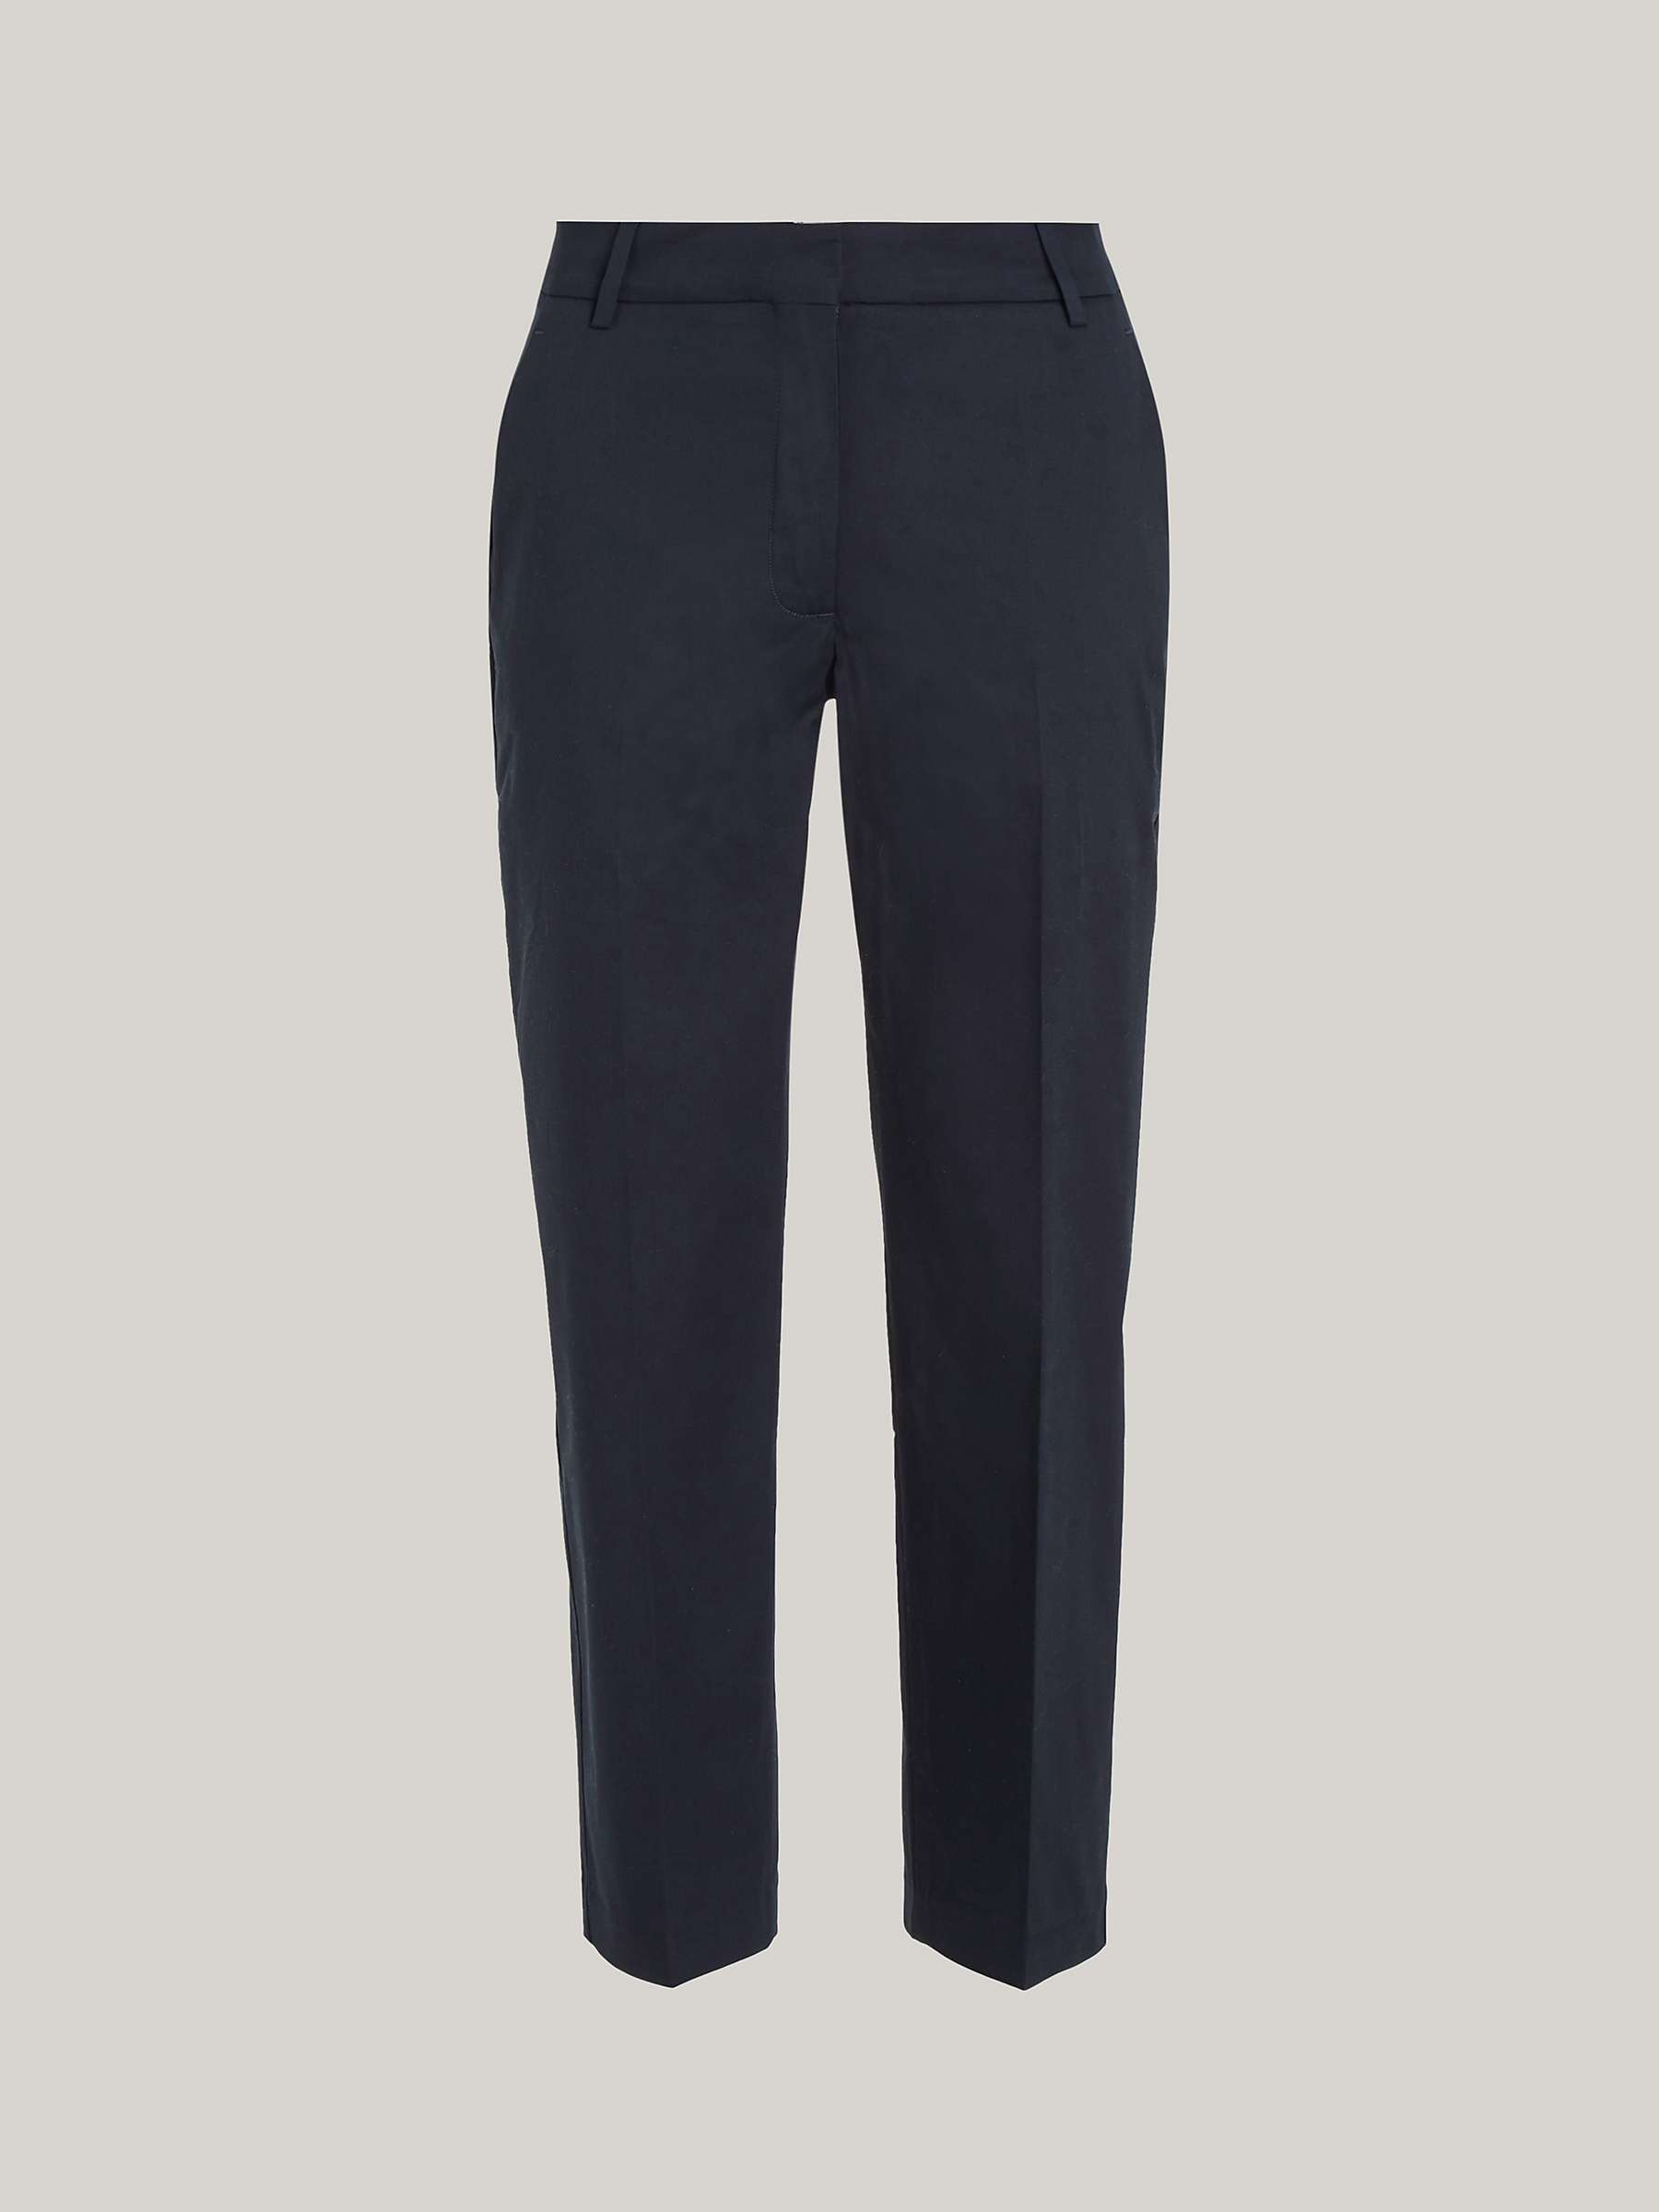 Buy Tommy Hilfiger Straight Leg Chinos Online at johnlewis.com